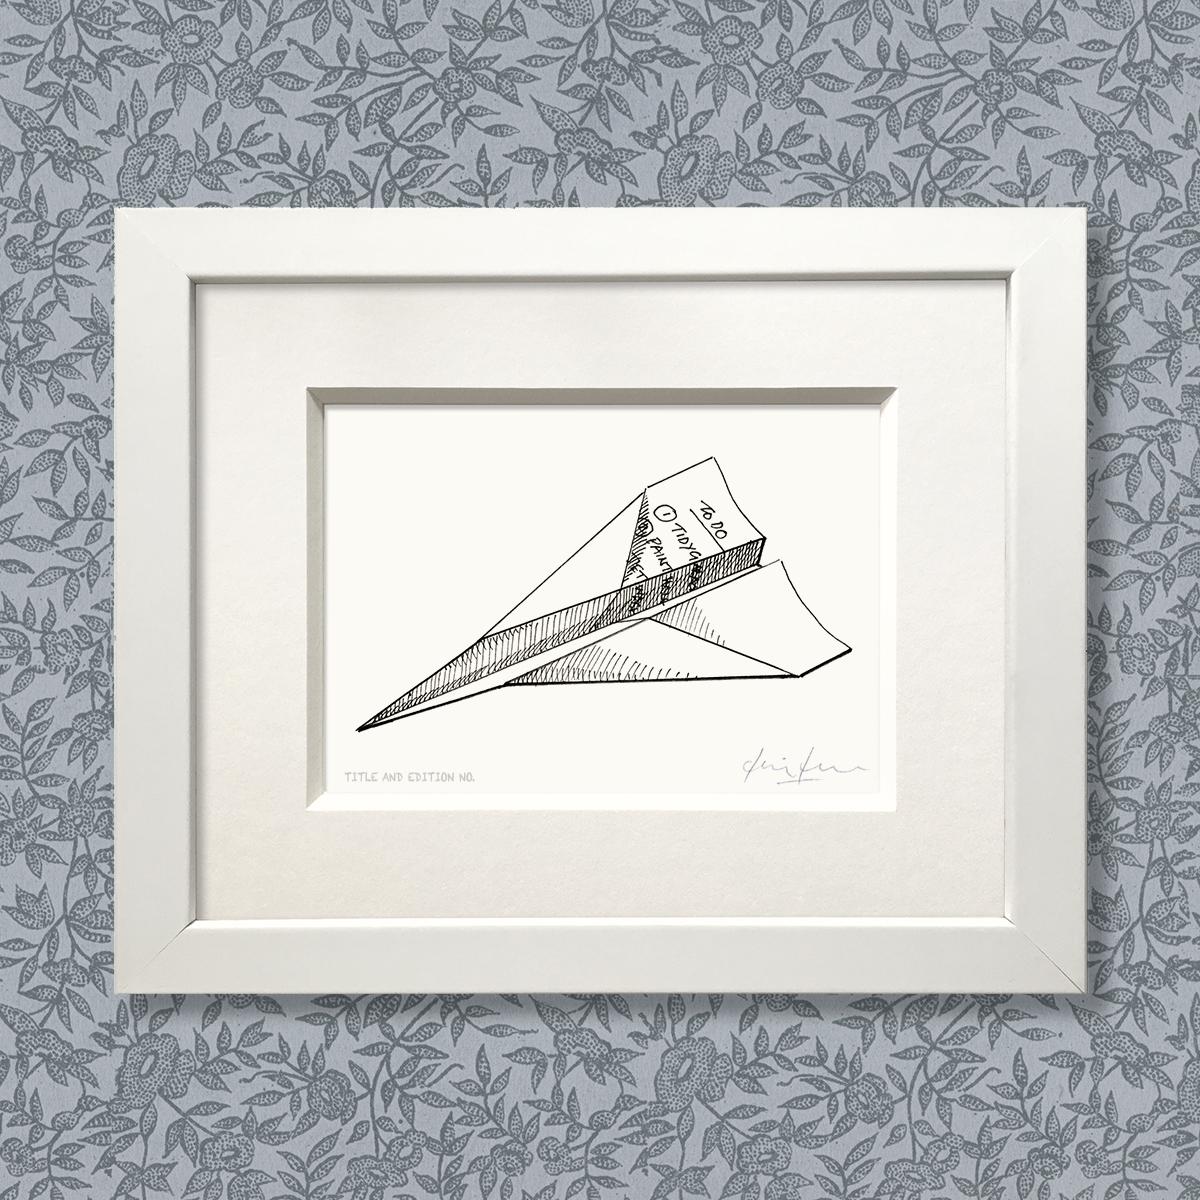 Limited edition print from a pen and ink drawing of a to-do list folded into a paper aeroplane in a white frame